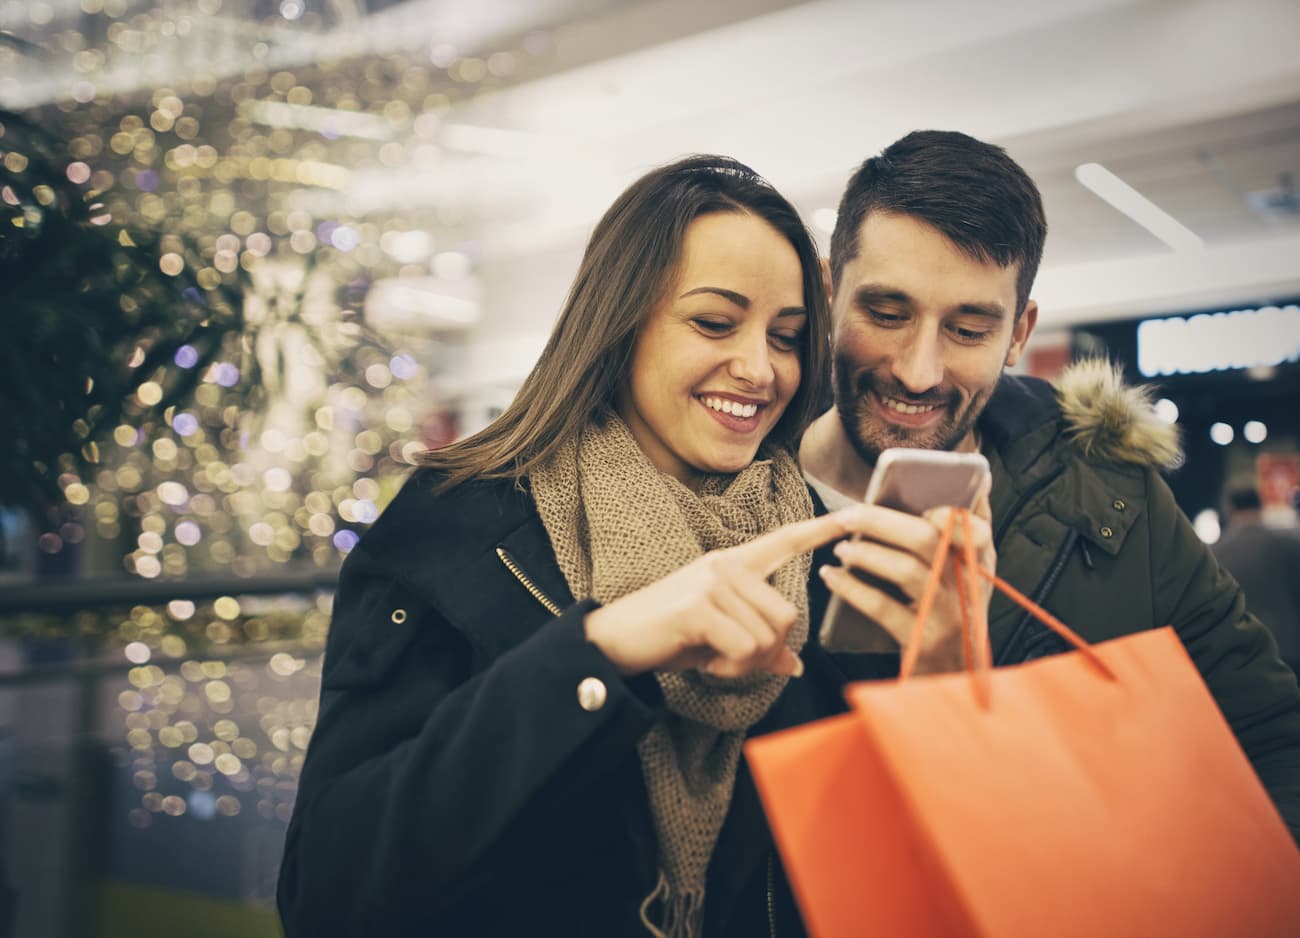 Couple looking at a phone while holiday shopping